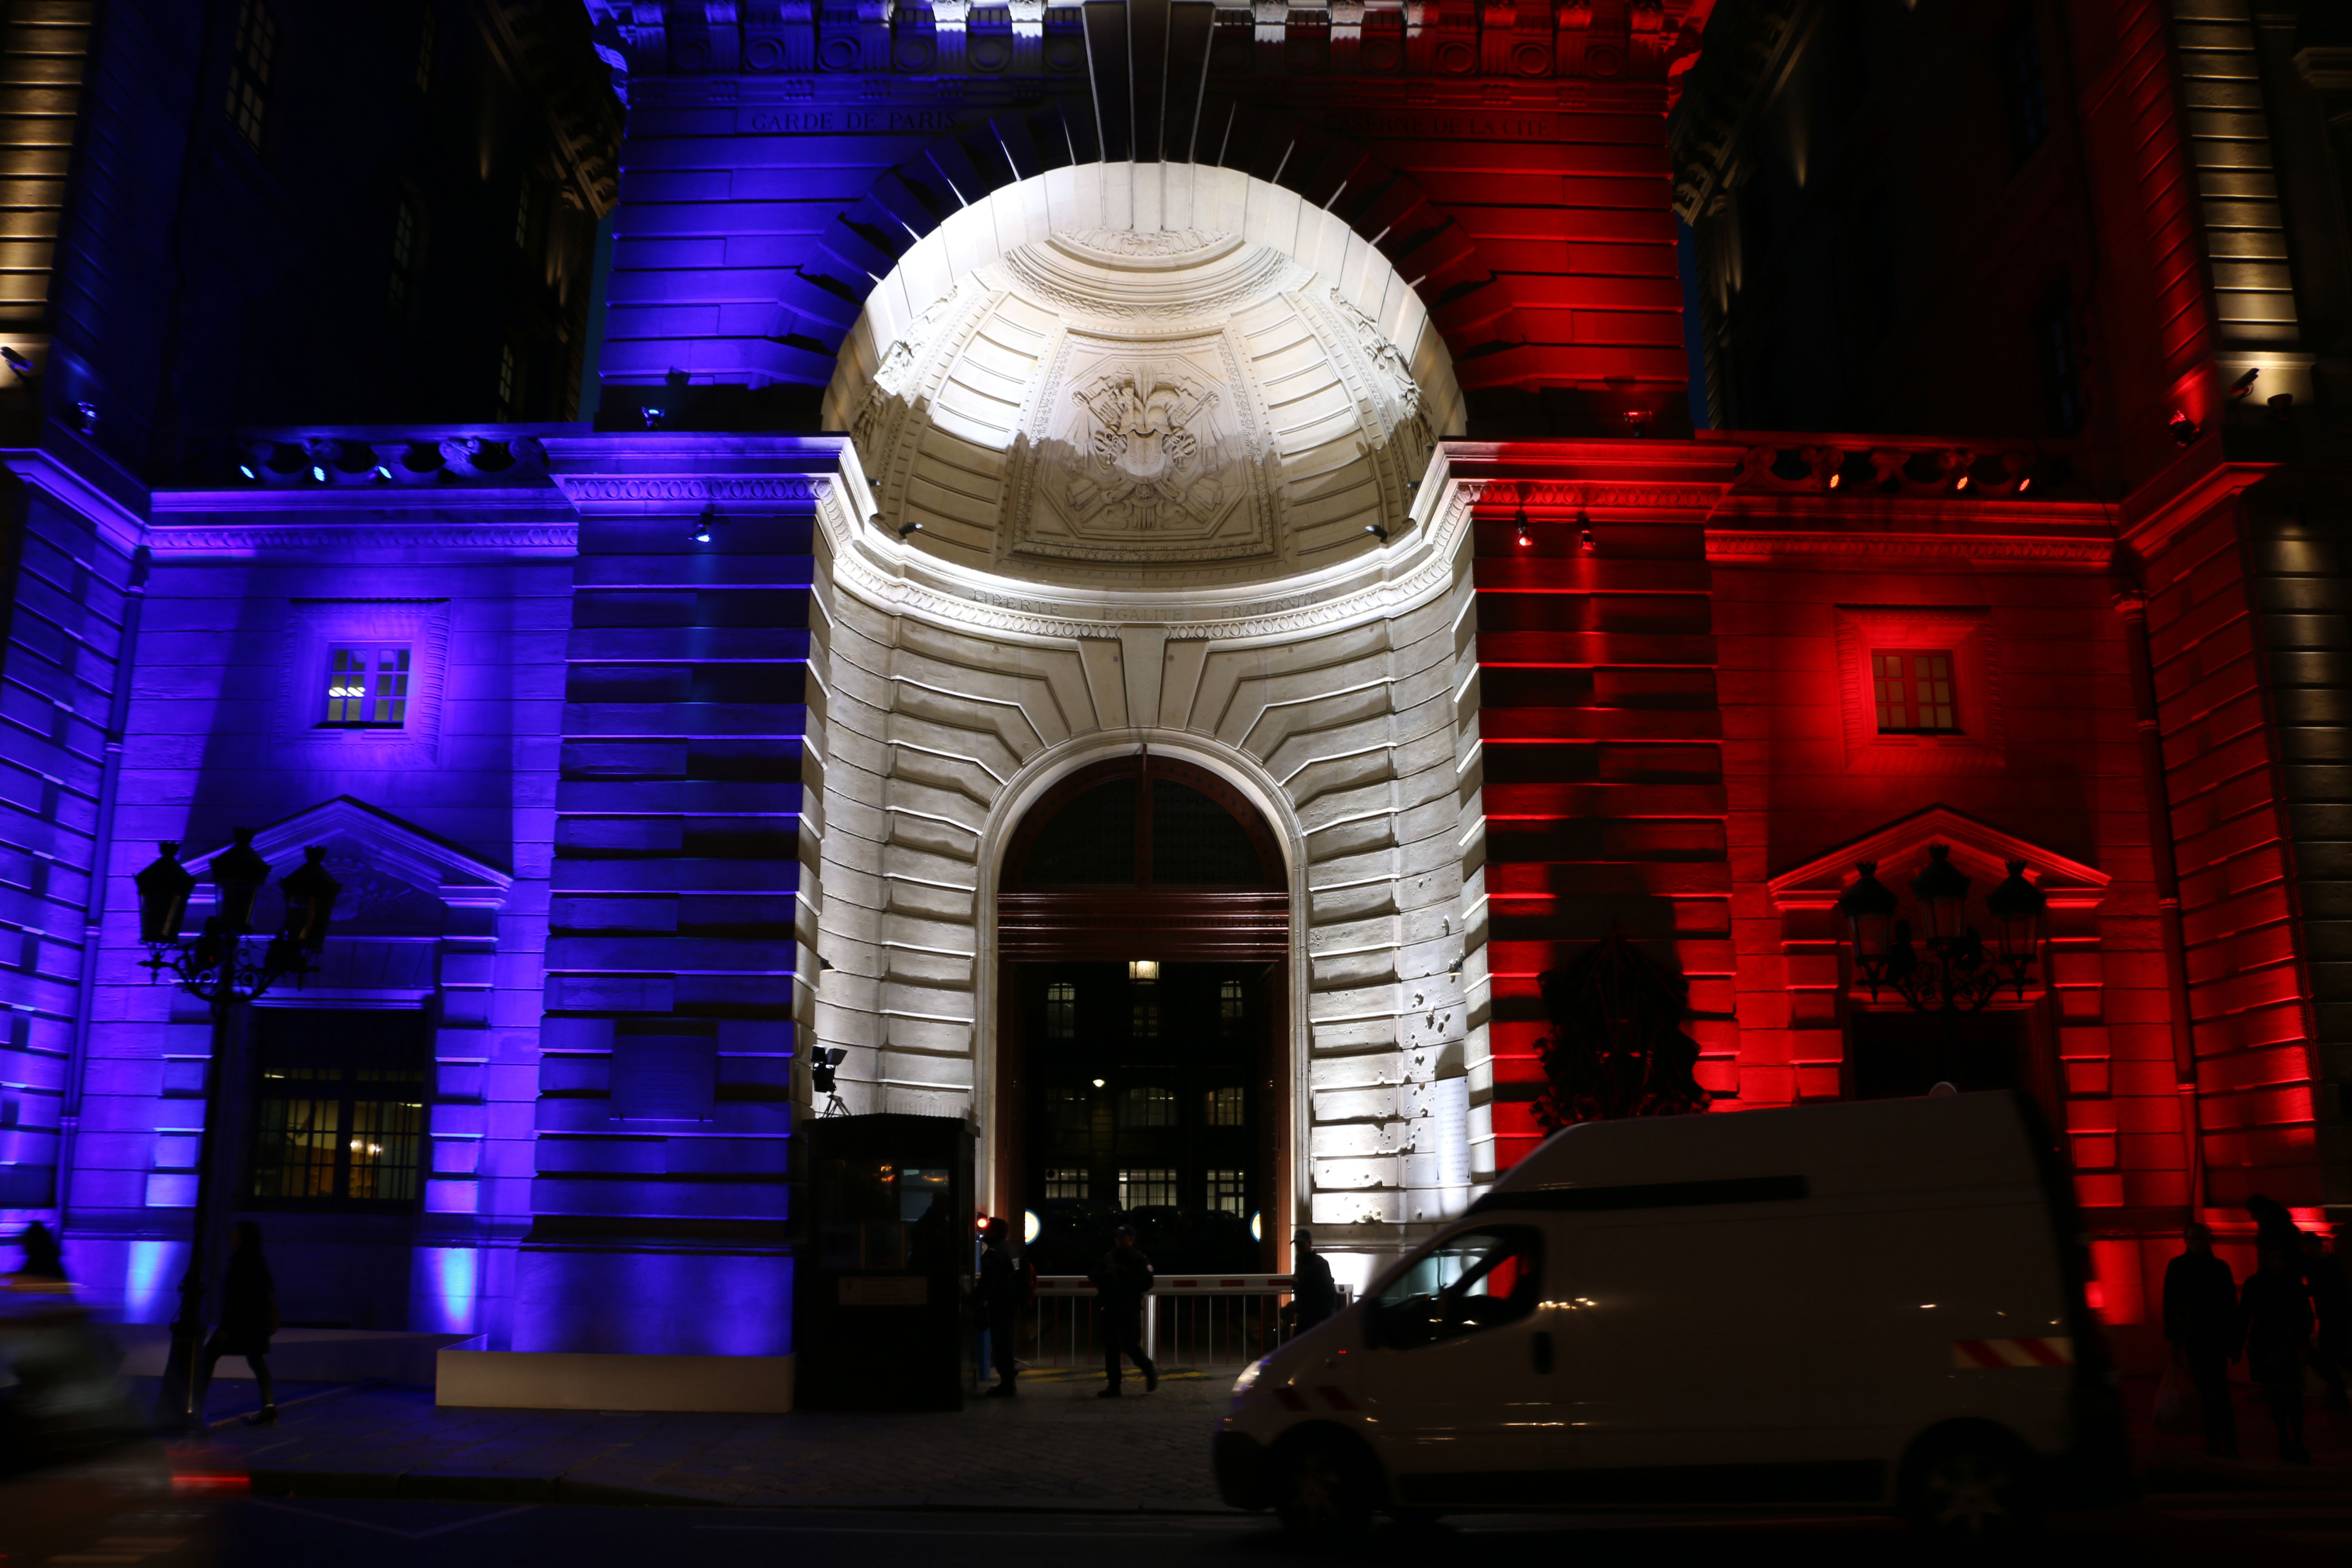 A building lit up in France’s national colors in November 2015, days after a deadly terror attack. (Photo: Nolan Peterson/The Daily Signal)